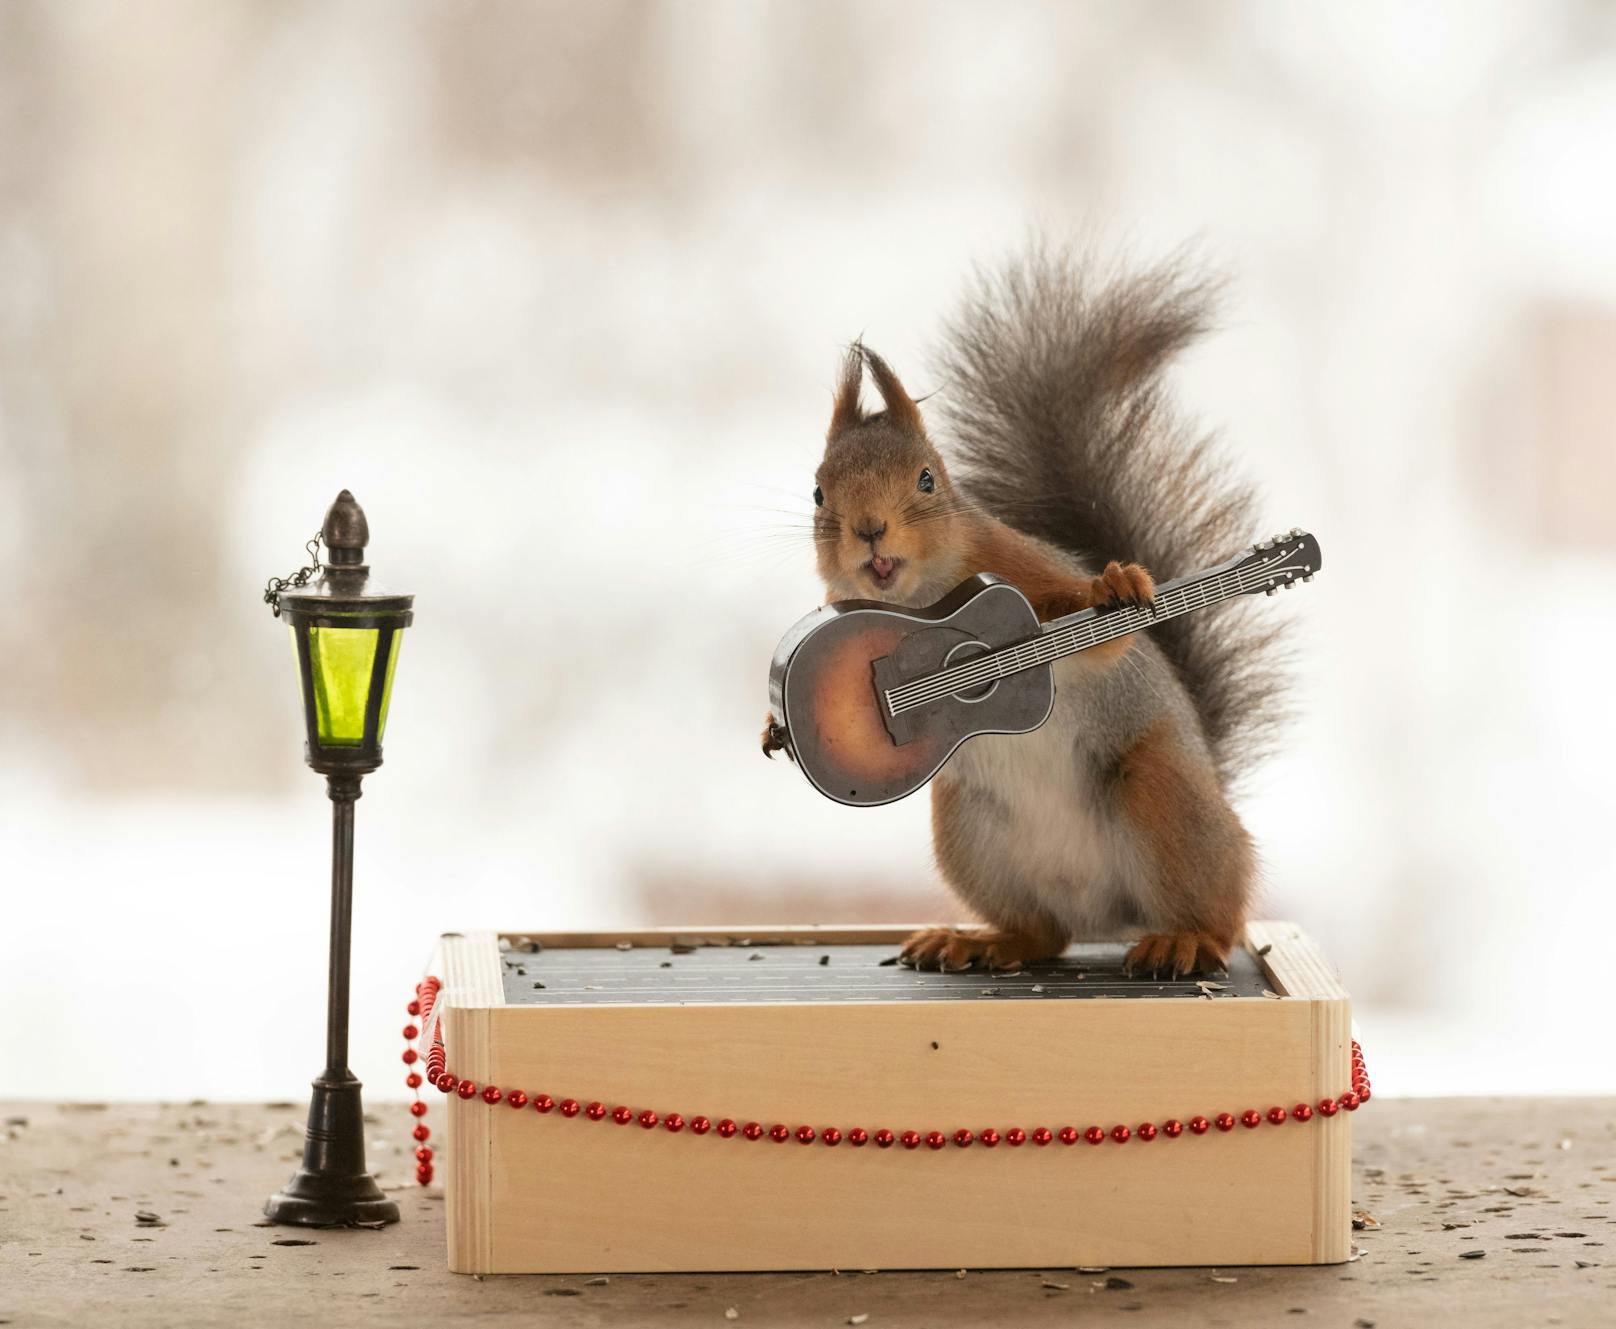 Let's Rock and Squirrel